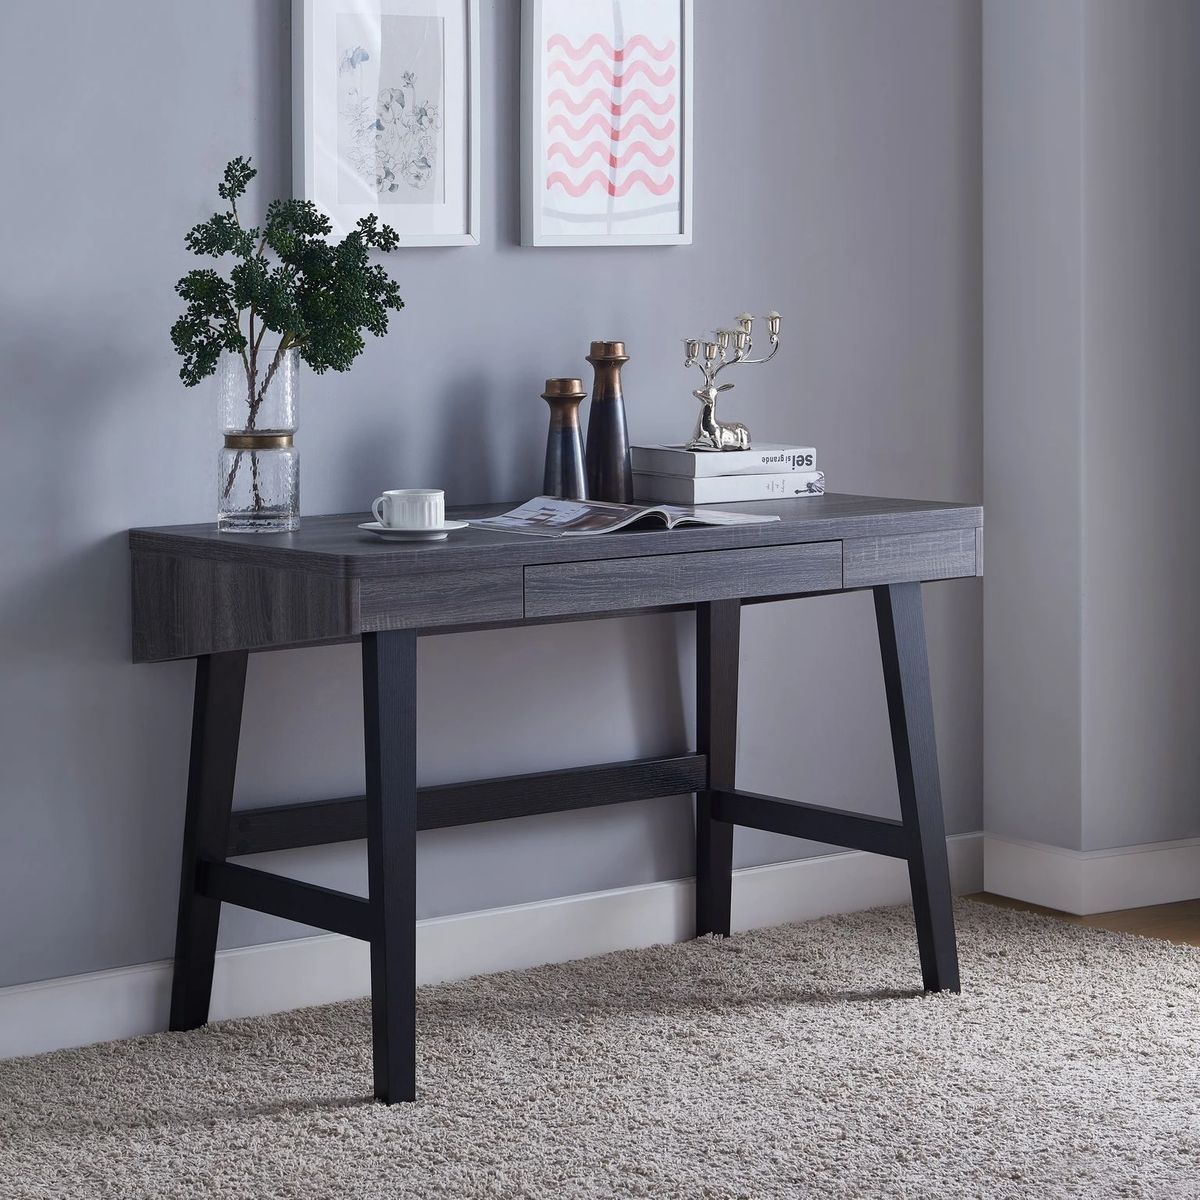 Fc Design Two Tone Writing Desk With One Center Drawer And Two Usb Pertaining To Black And Gray Oval Writing Desks (View 11 of 15)